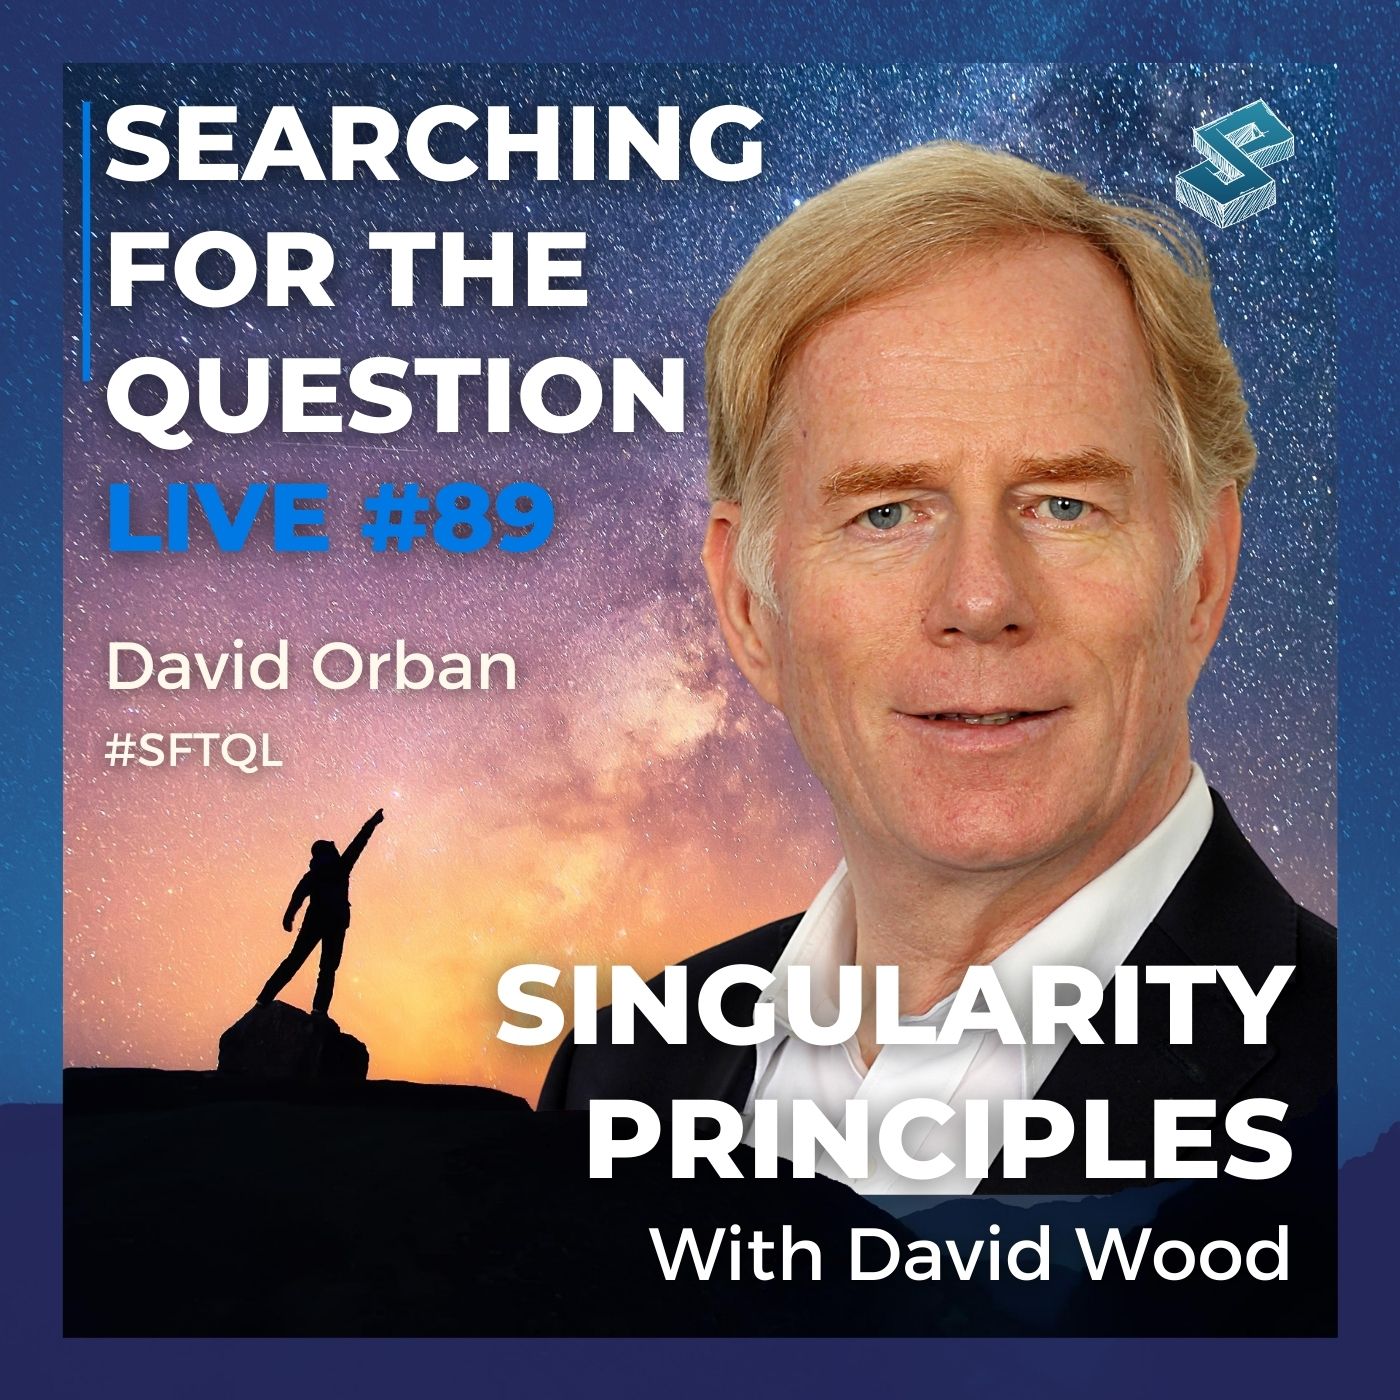 Singularity Principles with David Wood - Searching For The Question Live #89